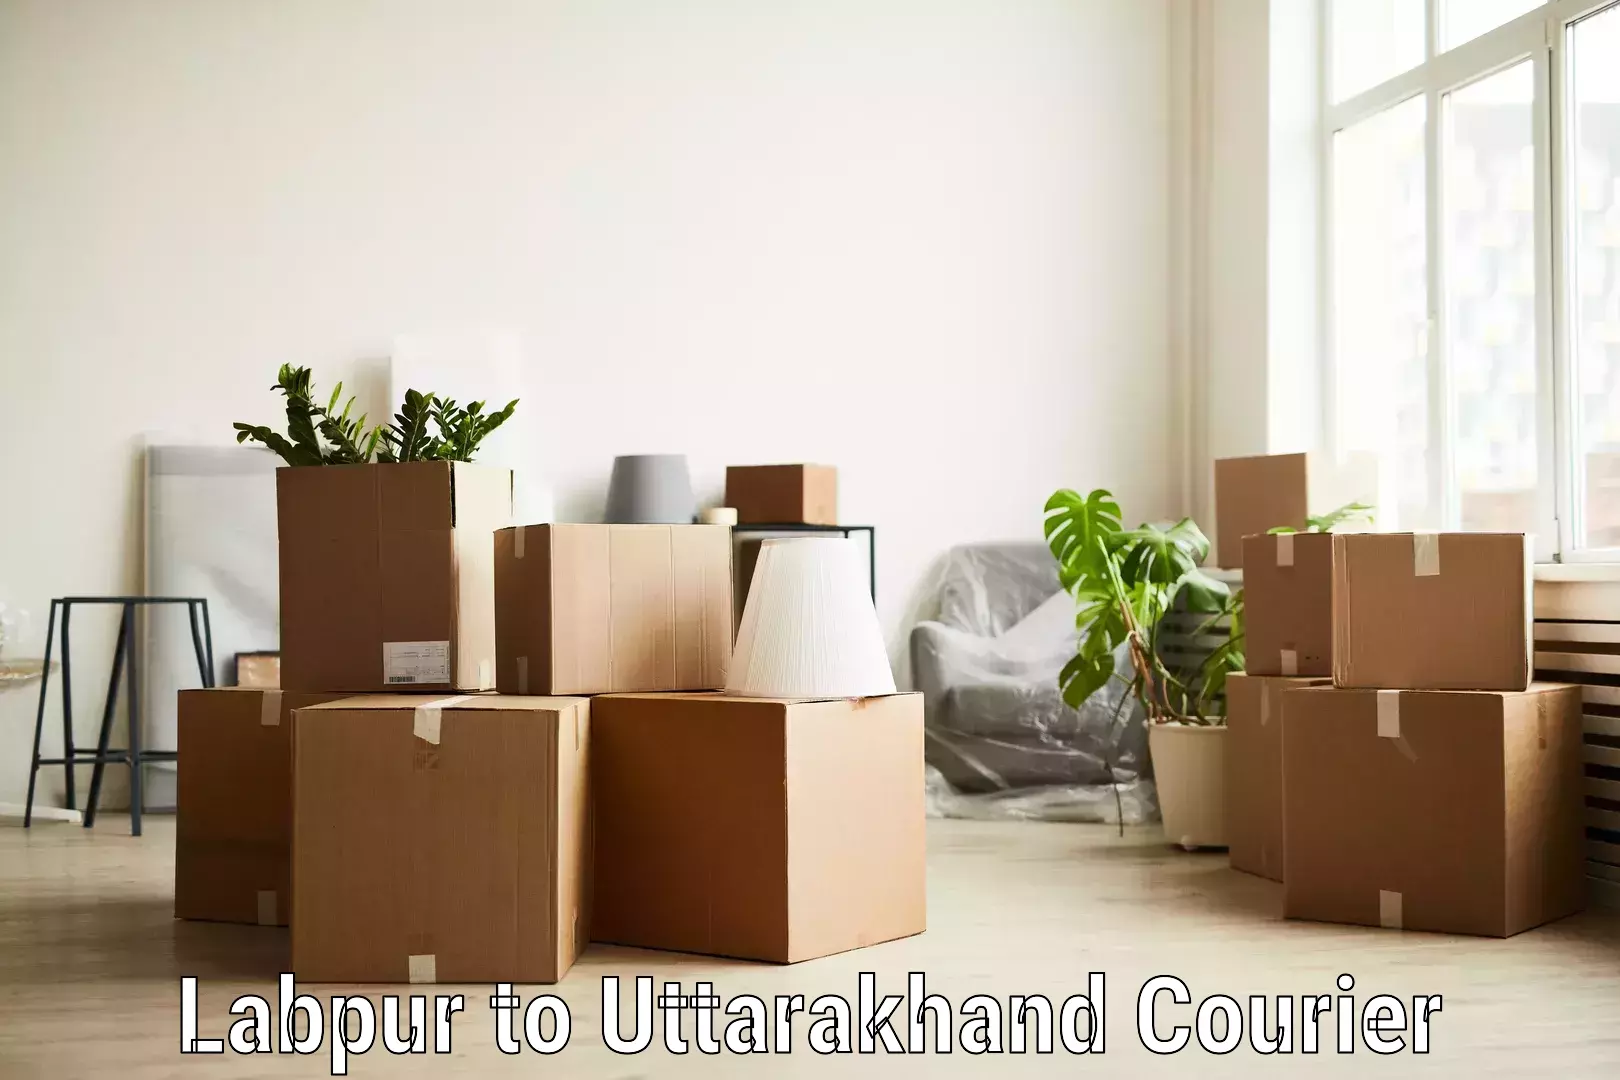 Online package tracking Labpur to Roorkee